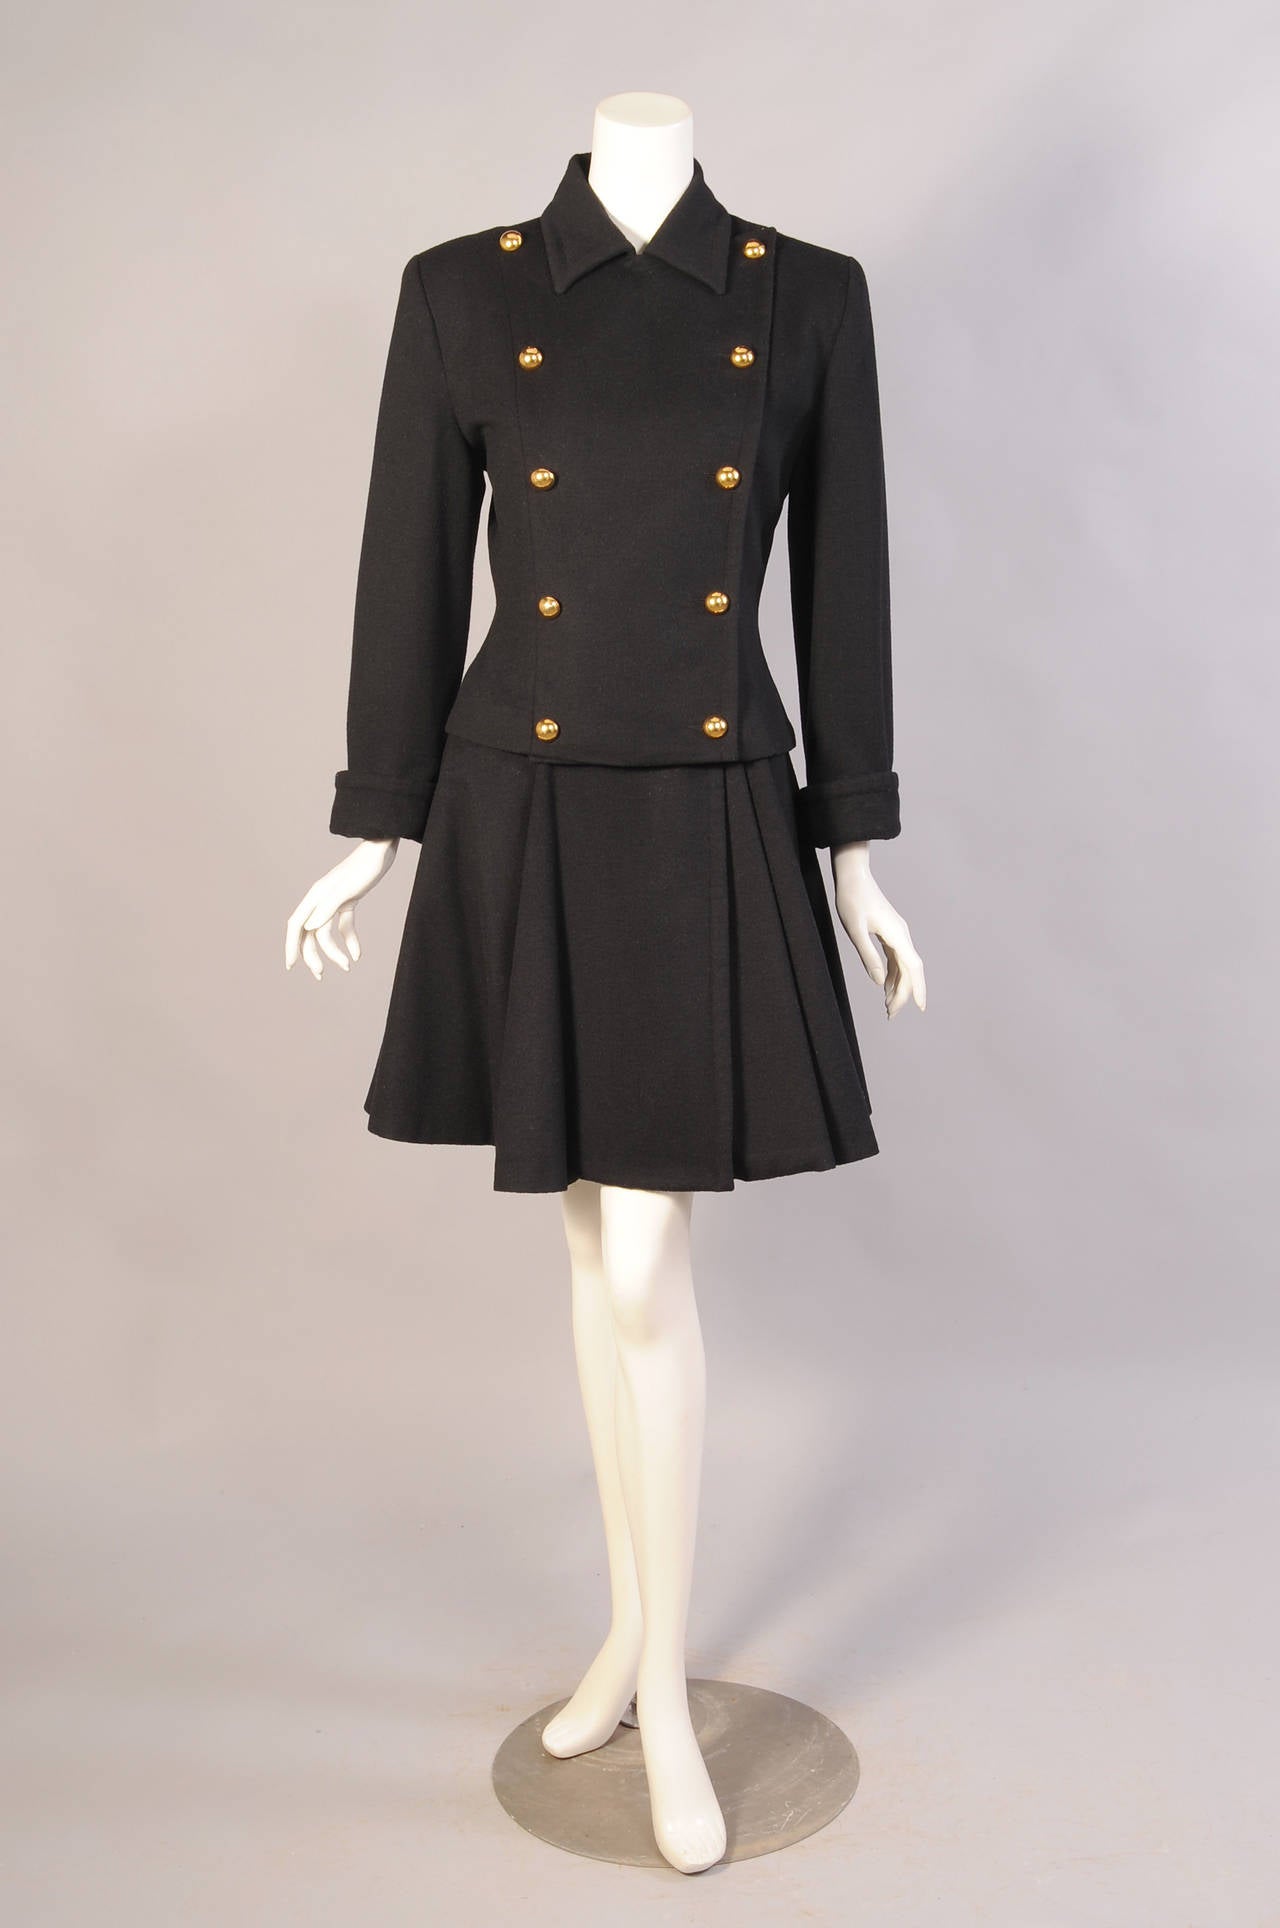 A wool and cashmere blend is used for this flirty skirt suit. The double breasted jacket has ten round brass buttons and the matching skirt has four more. Both pieces are fully lined, have extra buttons sewn inside, and they are in excellent